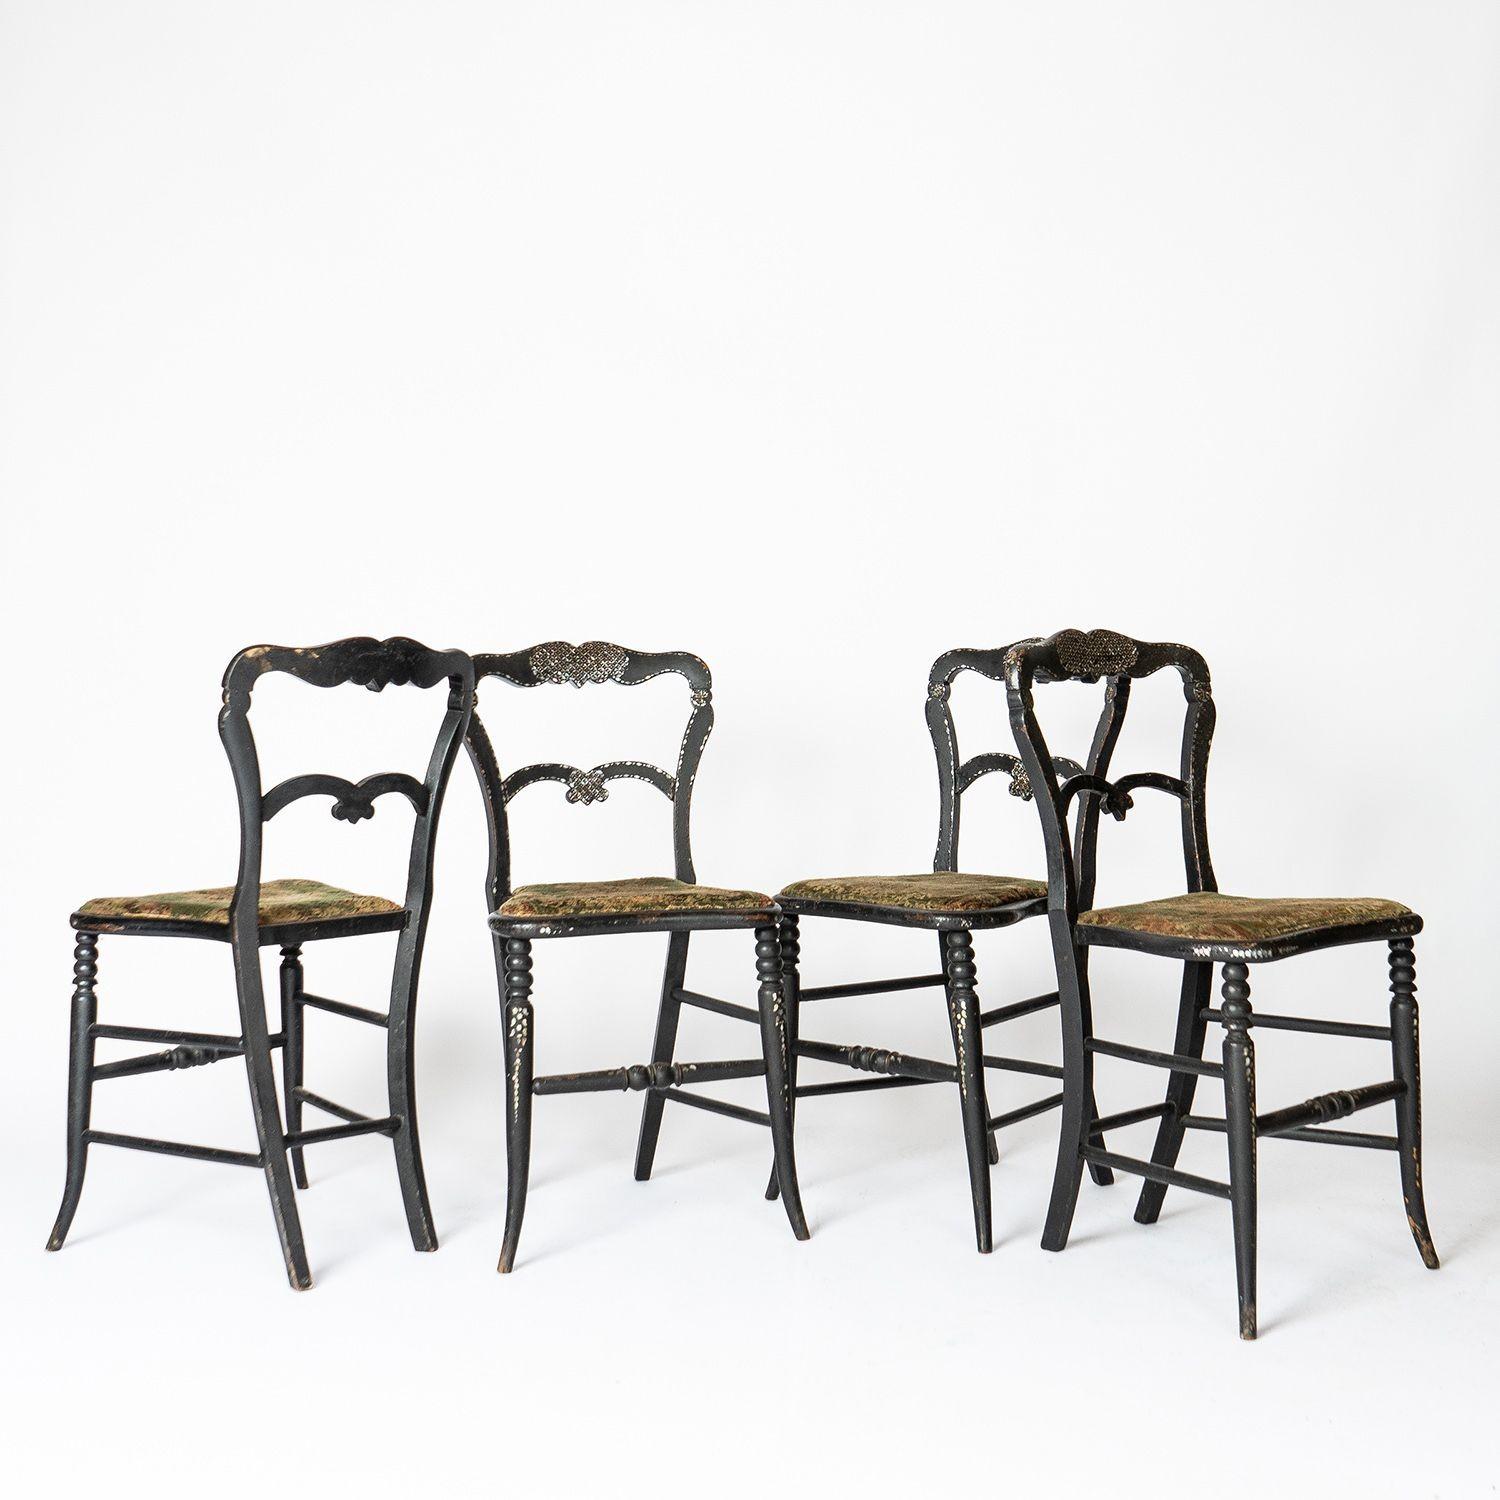 Set of 4 Antique Ebonised Mother of Pearl Inlaid Chairs With Velvet Upholstery For Sale 11